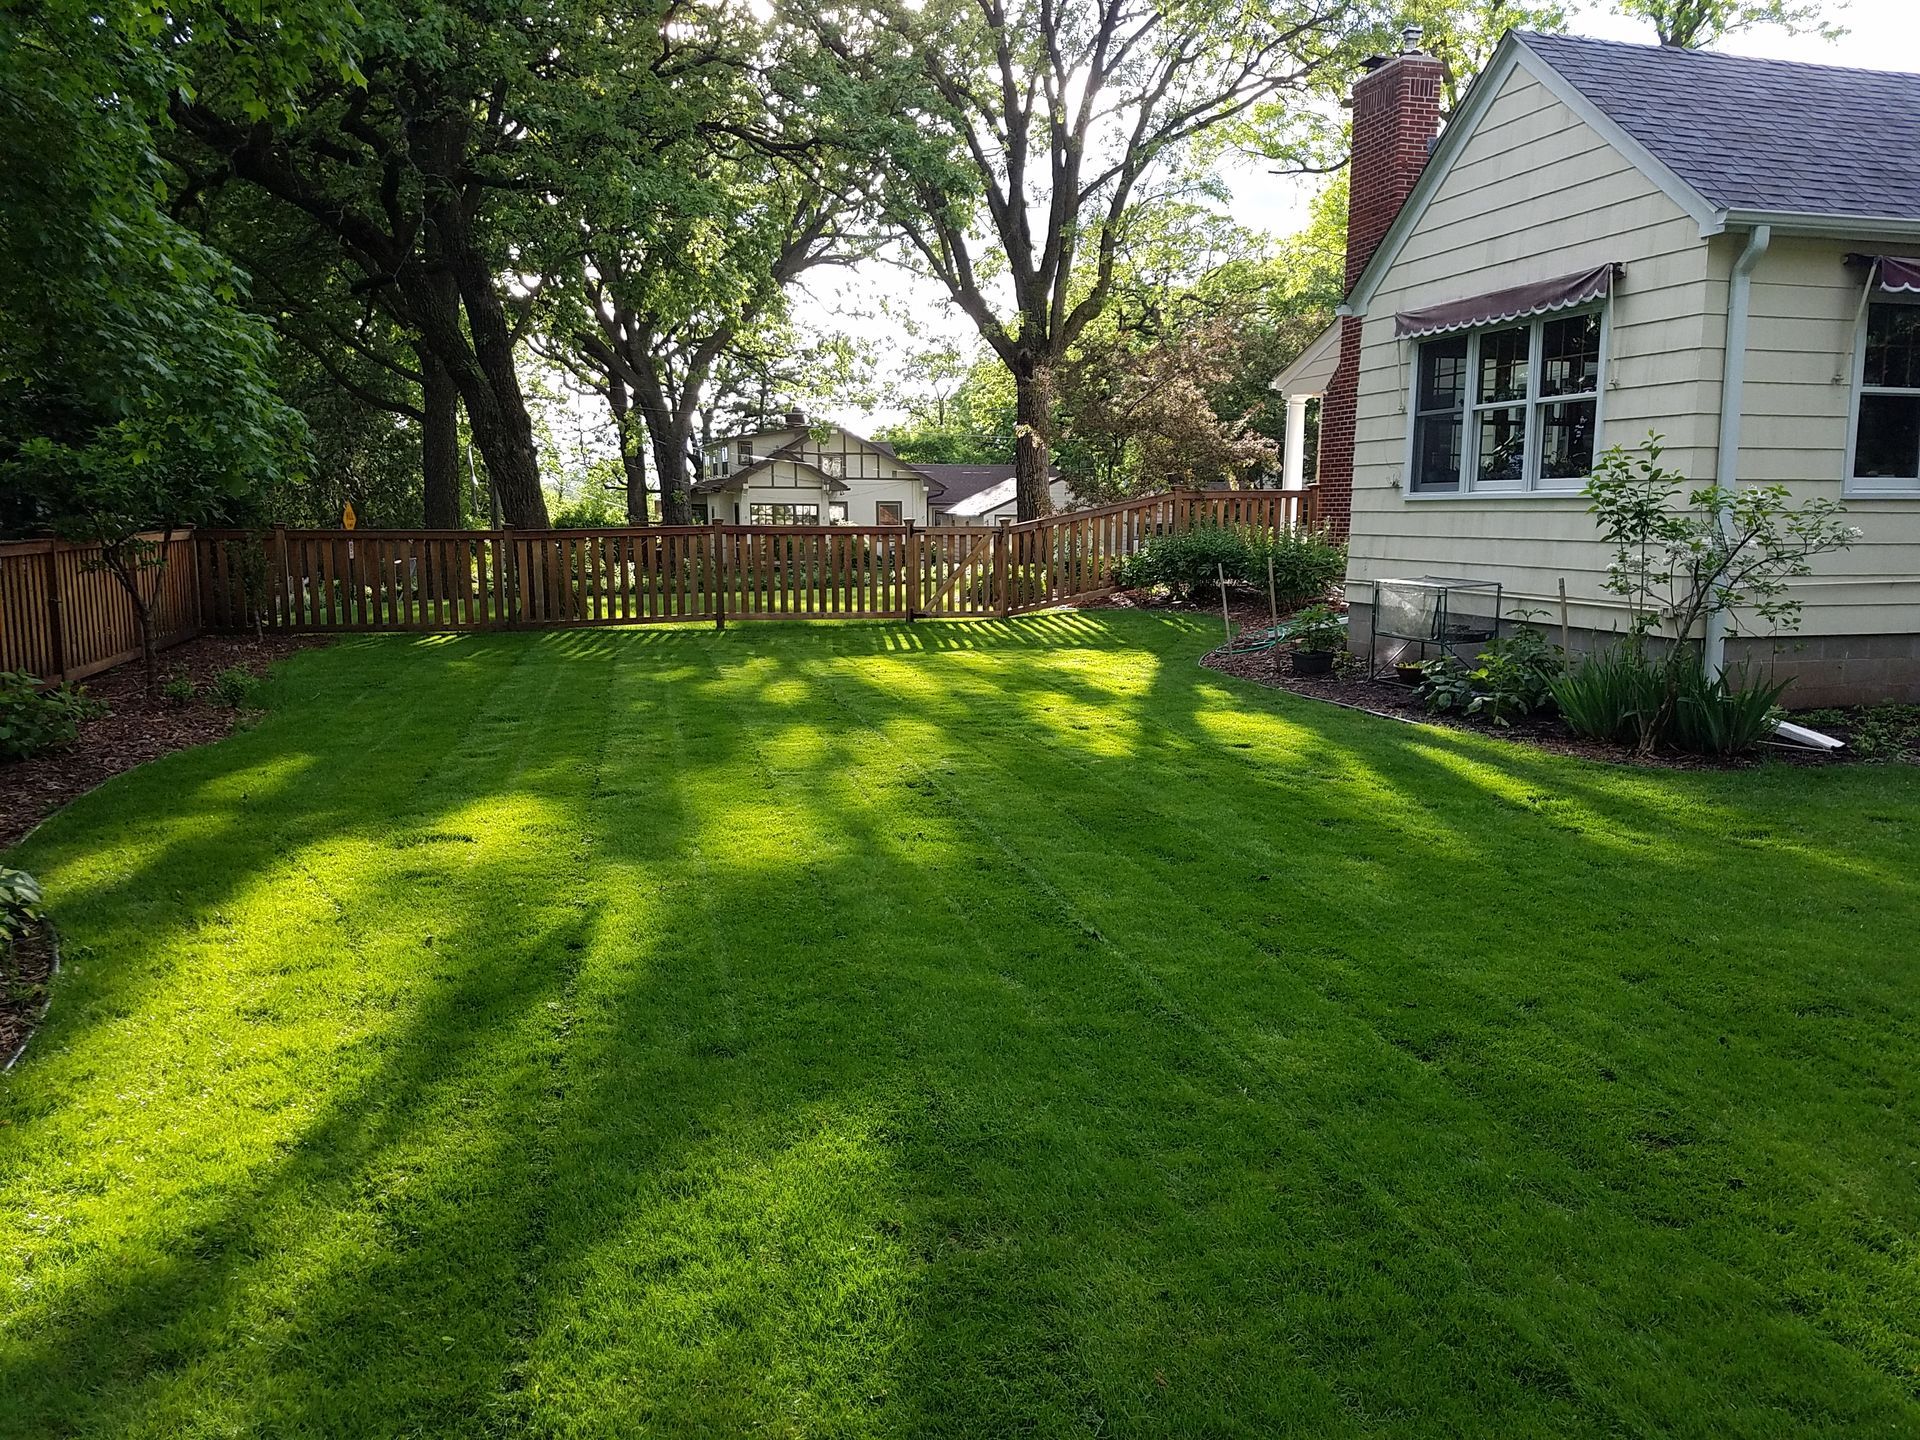 How to Manage Thatch in MN Lawns - Do I Need to Dethatch My Lawn in Minnesota?